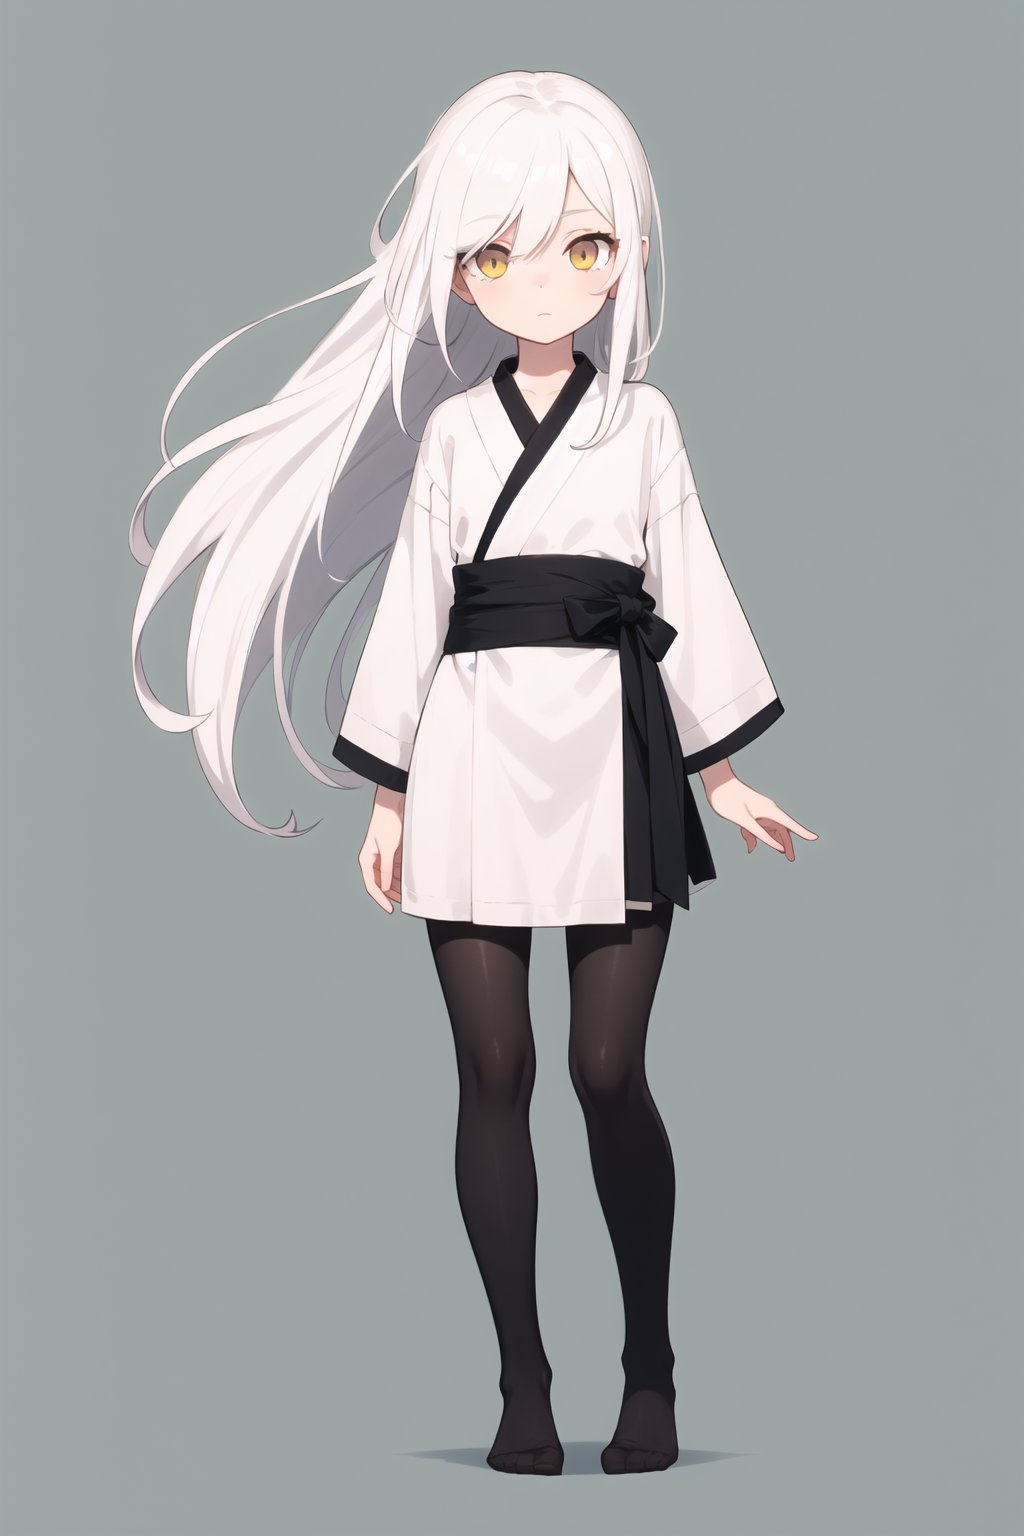 golden eyes, white hair, Highly detailed, midjourney, perfecteyes, long hair, female, small body, cyan background, short white robe, no shoes, black tights, long sidebangs, straight hair, black sash, frontal view, standing straight